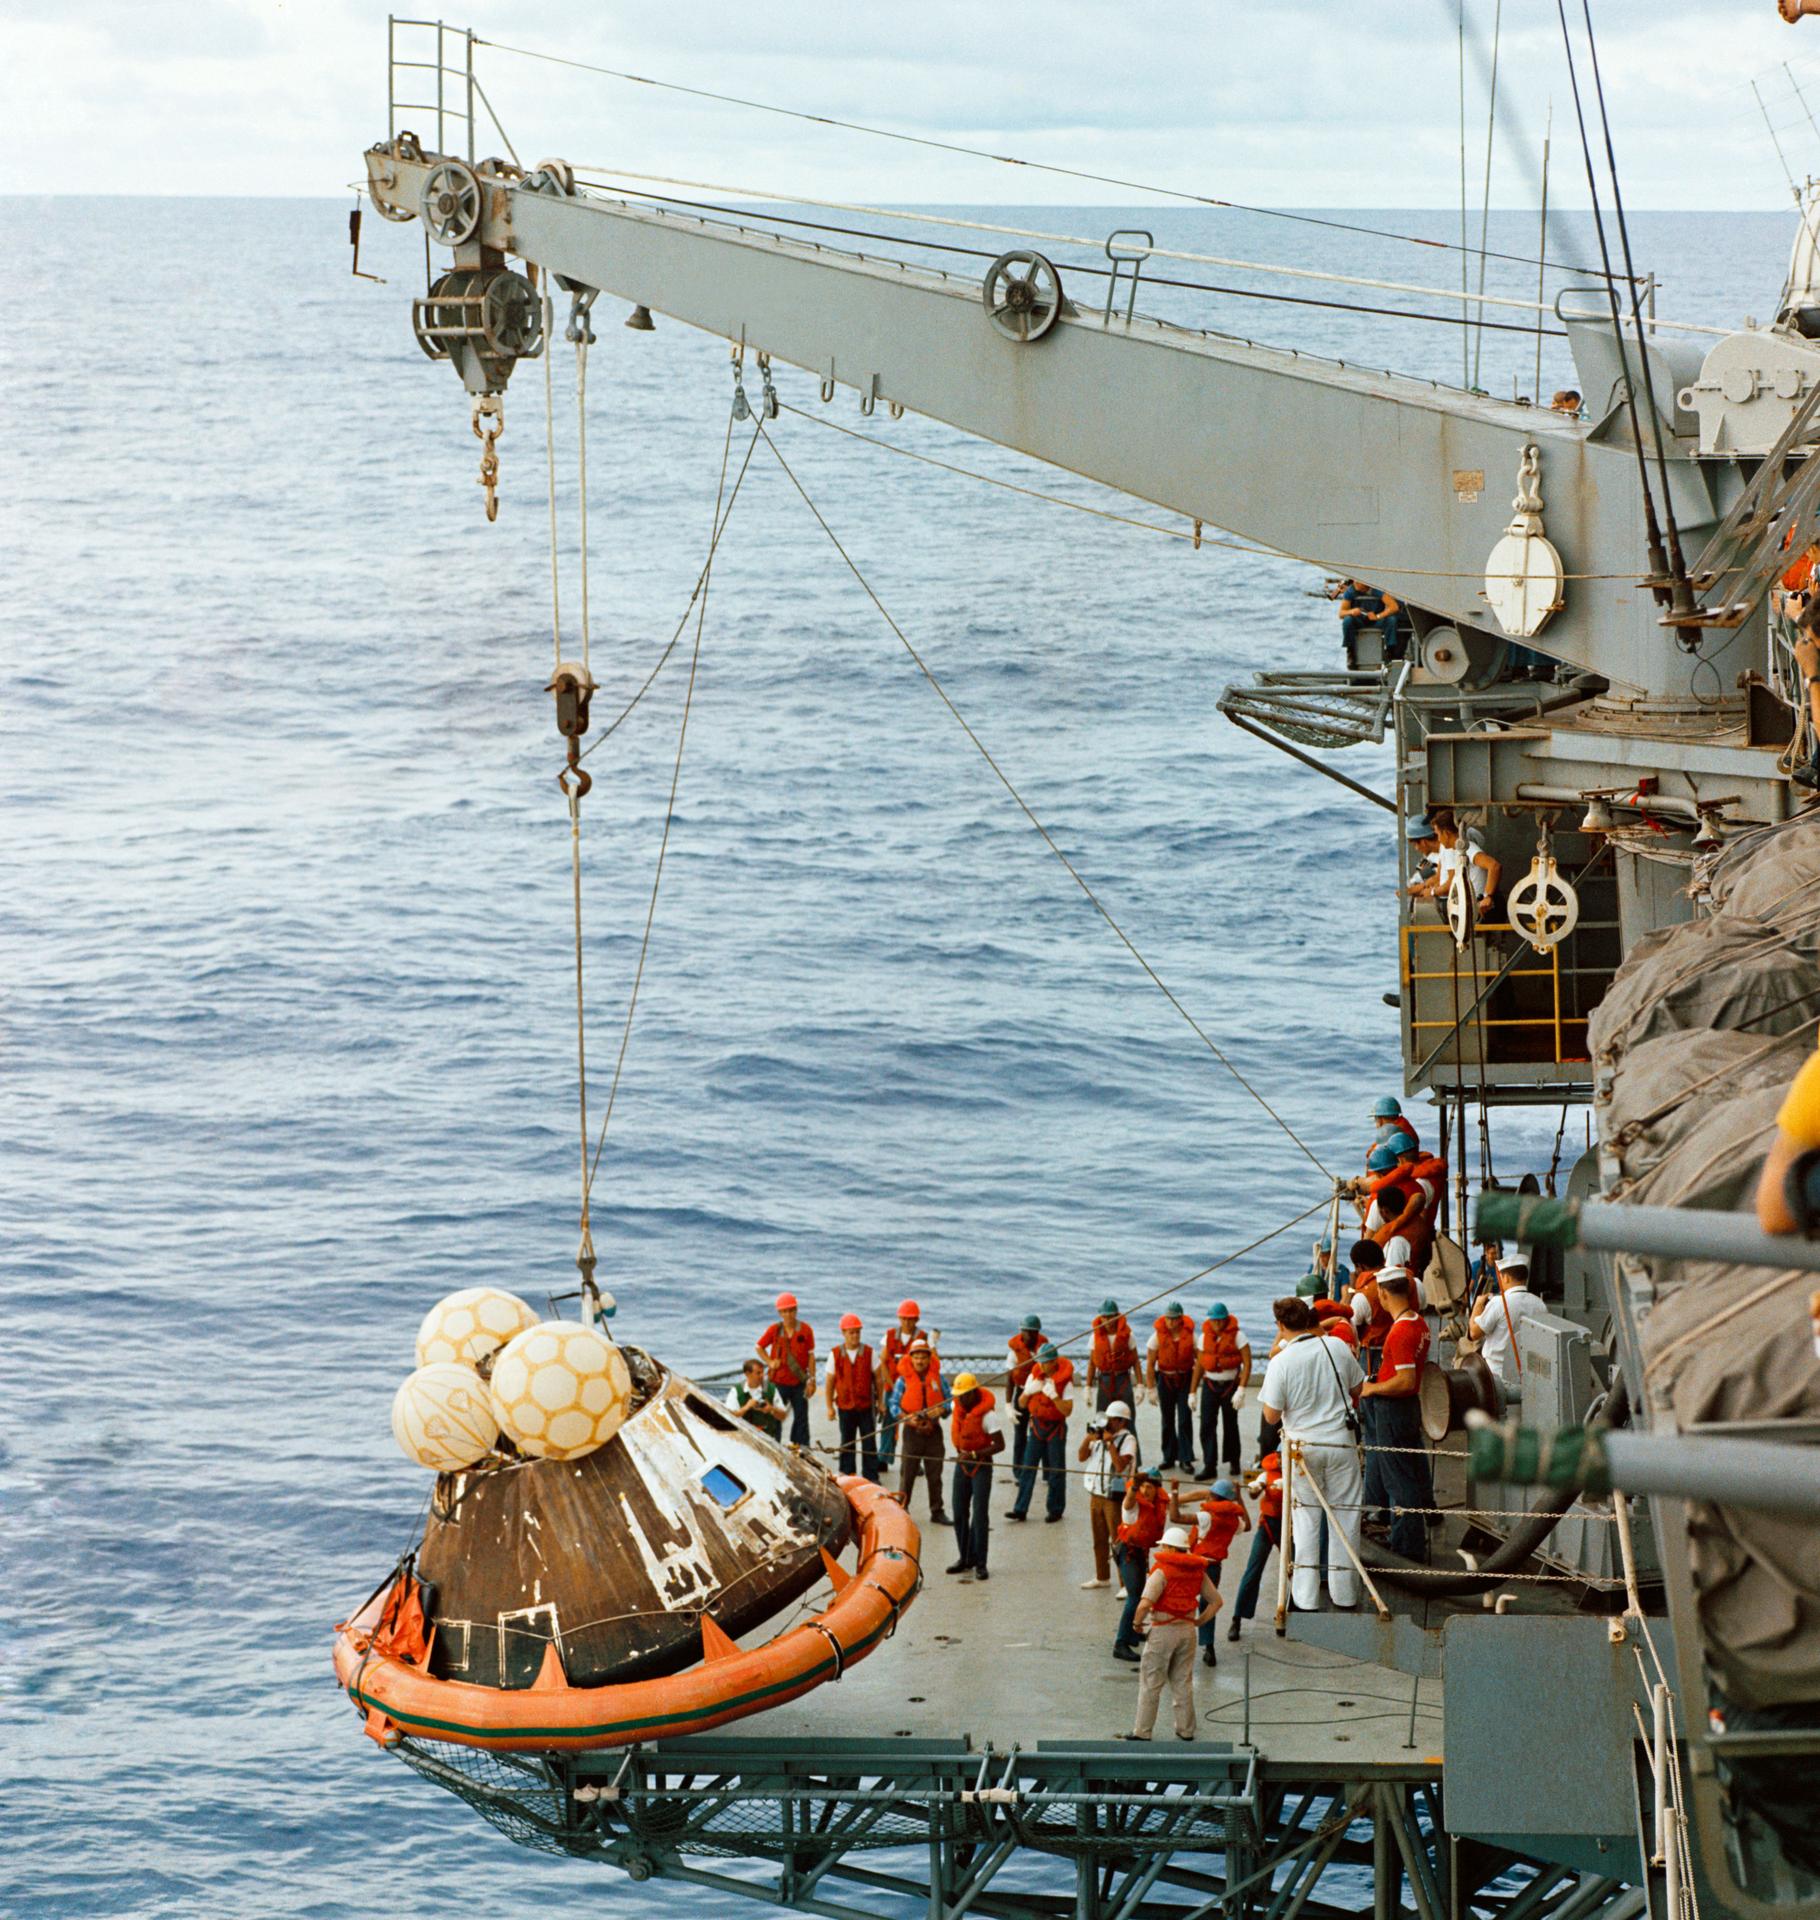 Apollo 13 command module recovery aboard the USS Iwo Jima on April 17, 1970 in the South Pacific Ocean.